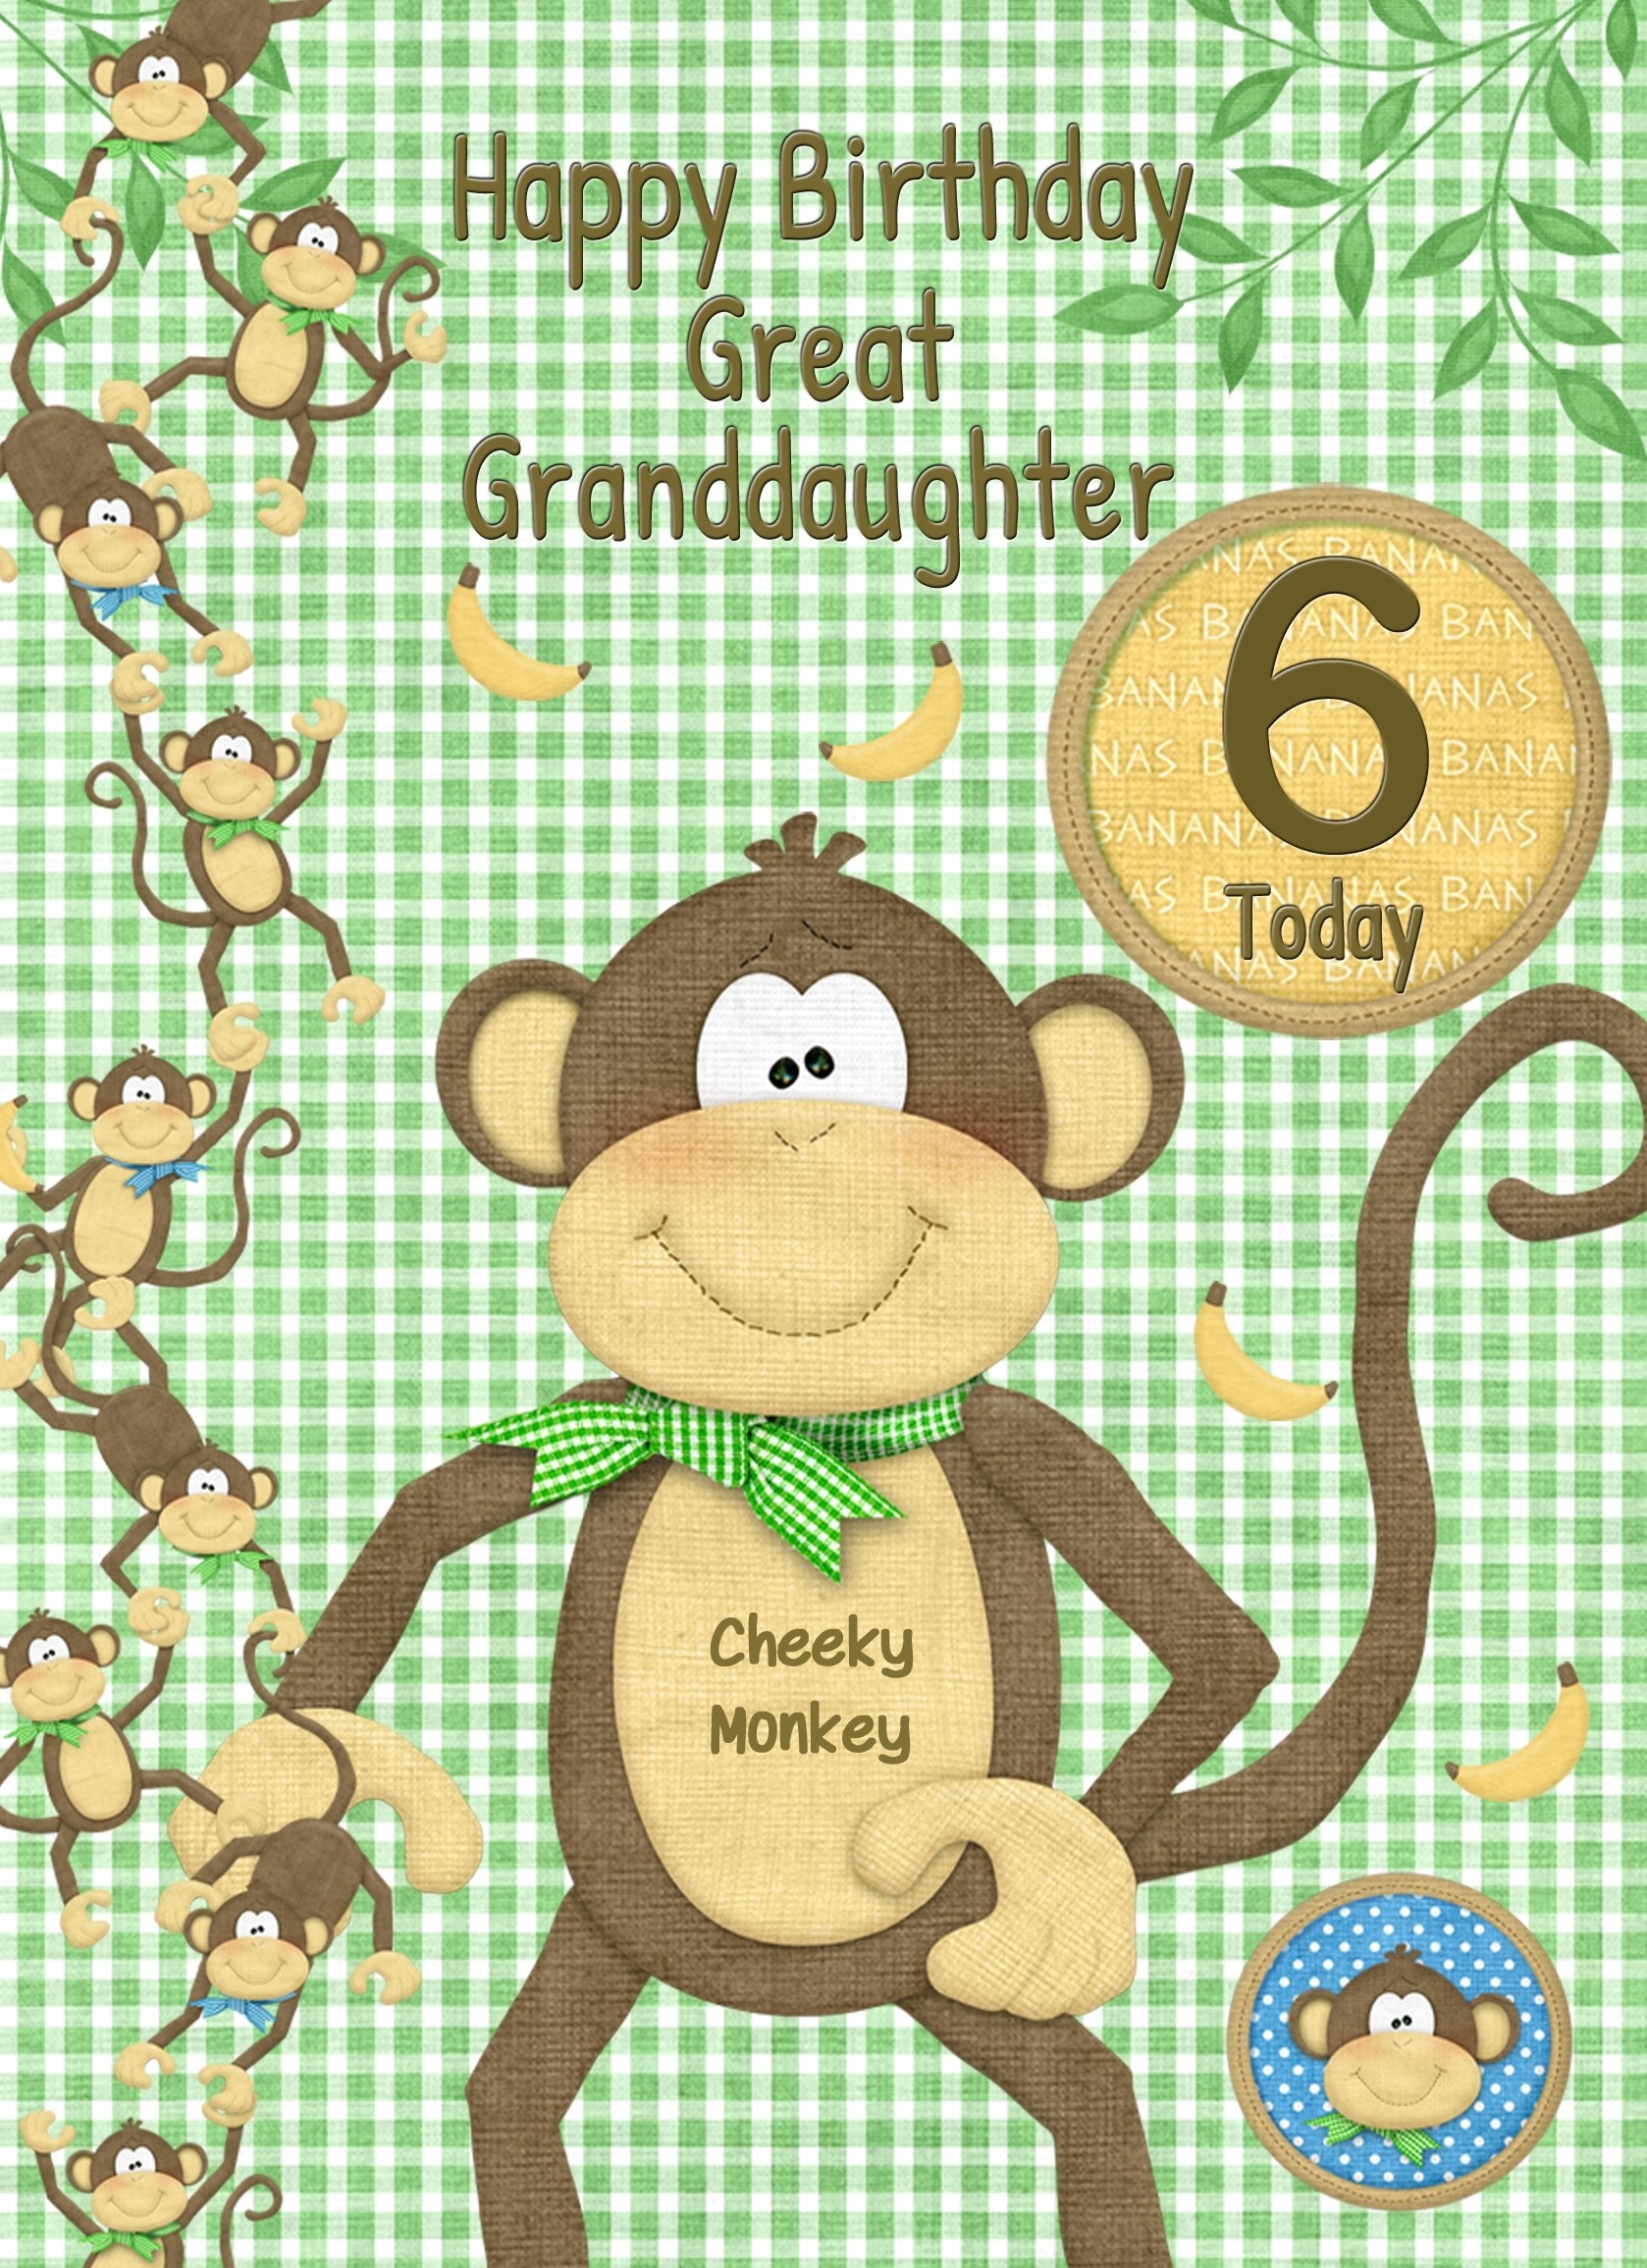 Kids 6th Birthday Cheeky Monkey Cartoon Card for Great Granddaughter